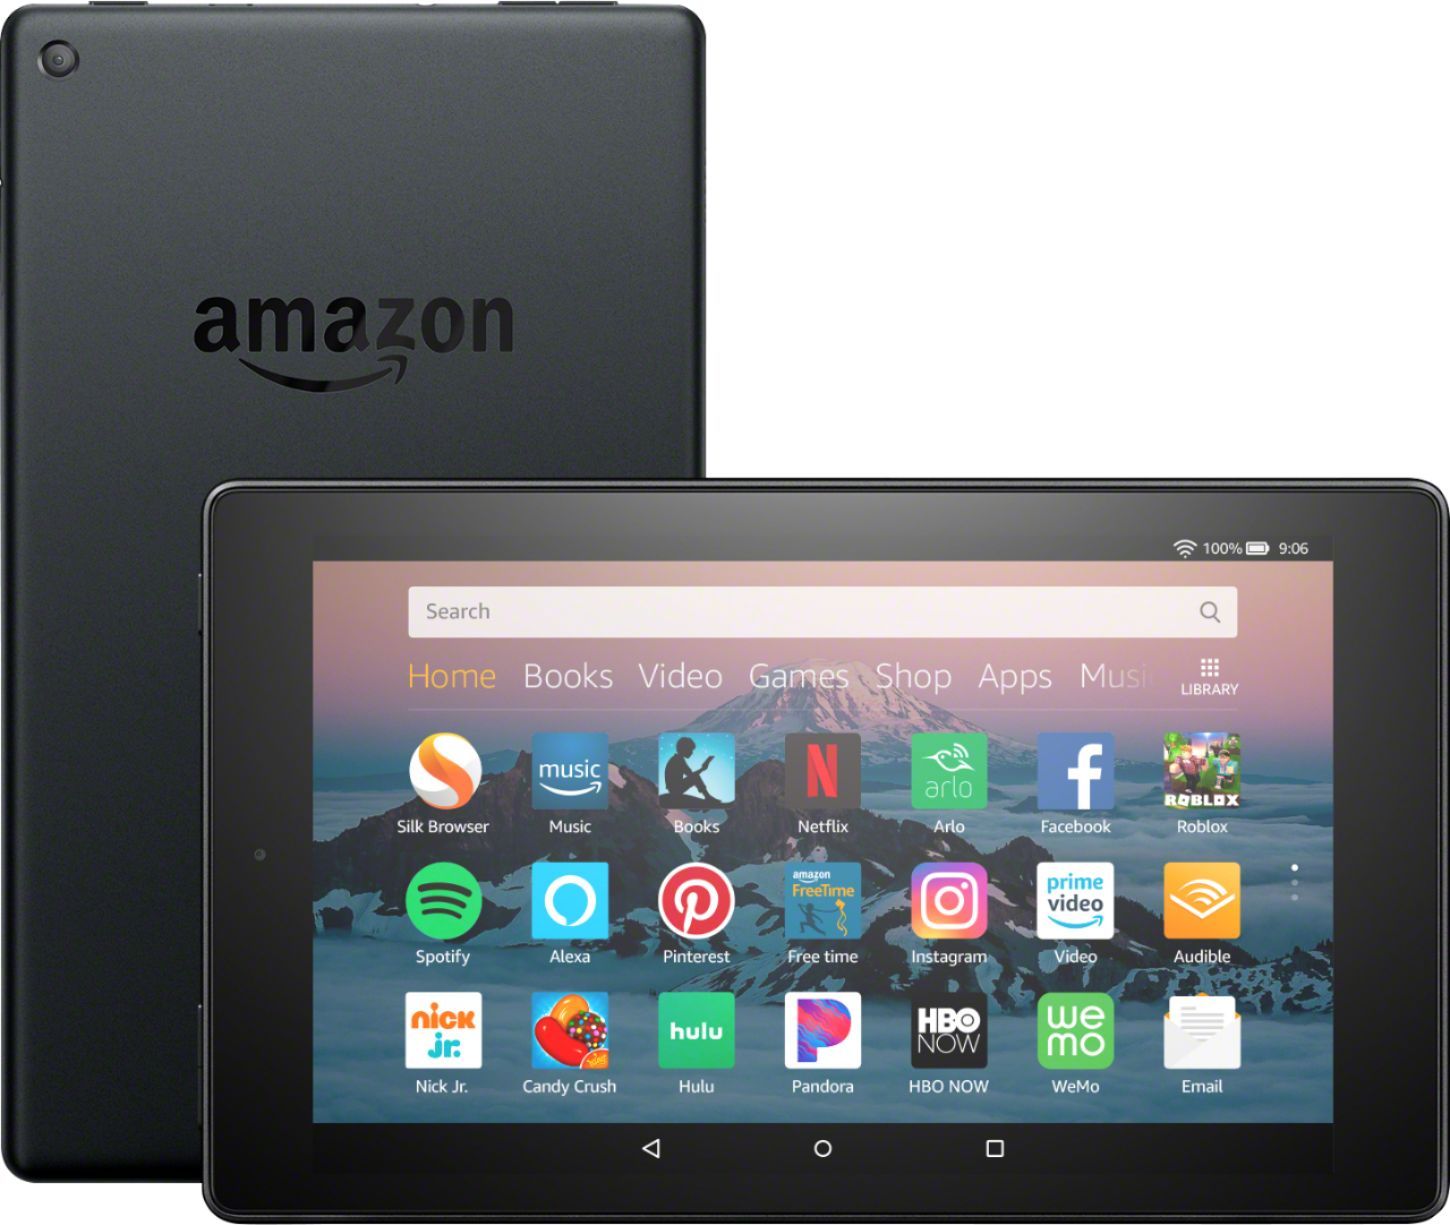 Amazon Fire HD 8 front and back